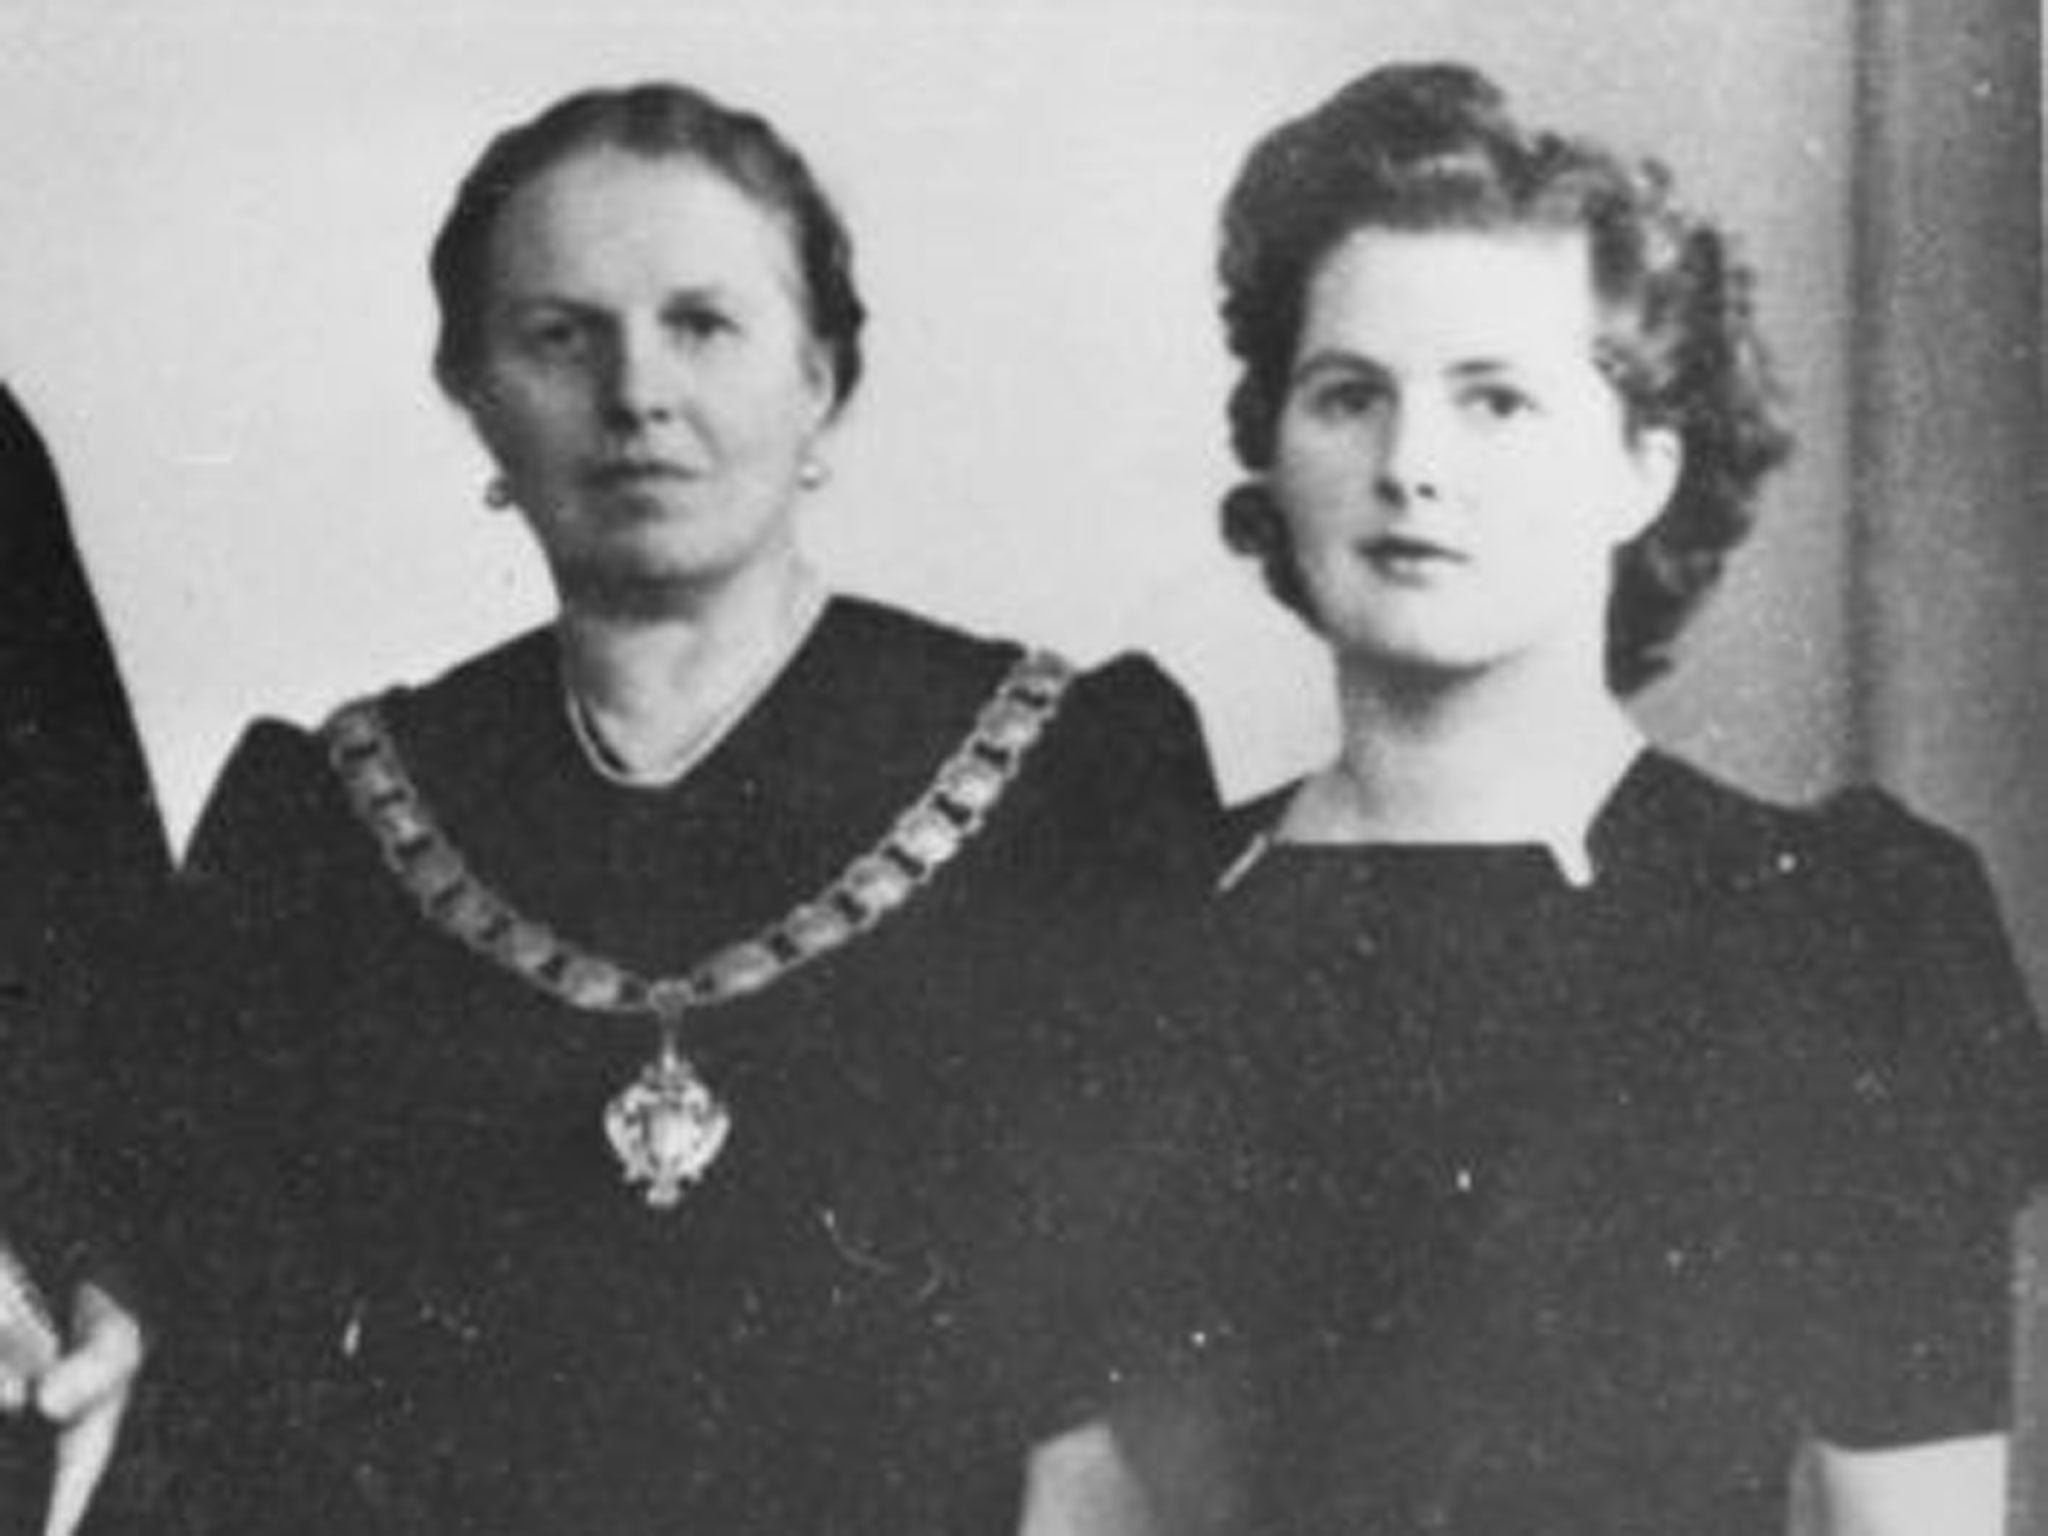 Baroness Thatcher with her mother in 1945. Their relationship has been the subject of much speculation